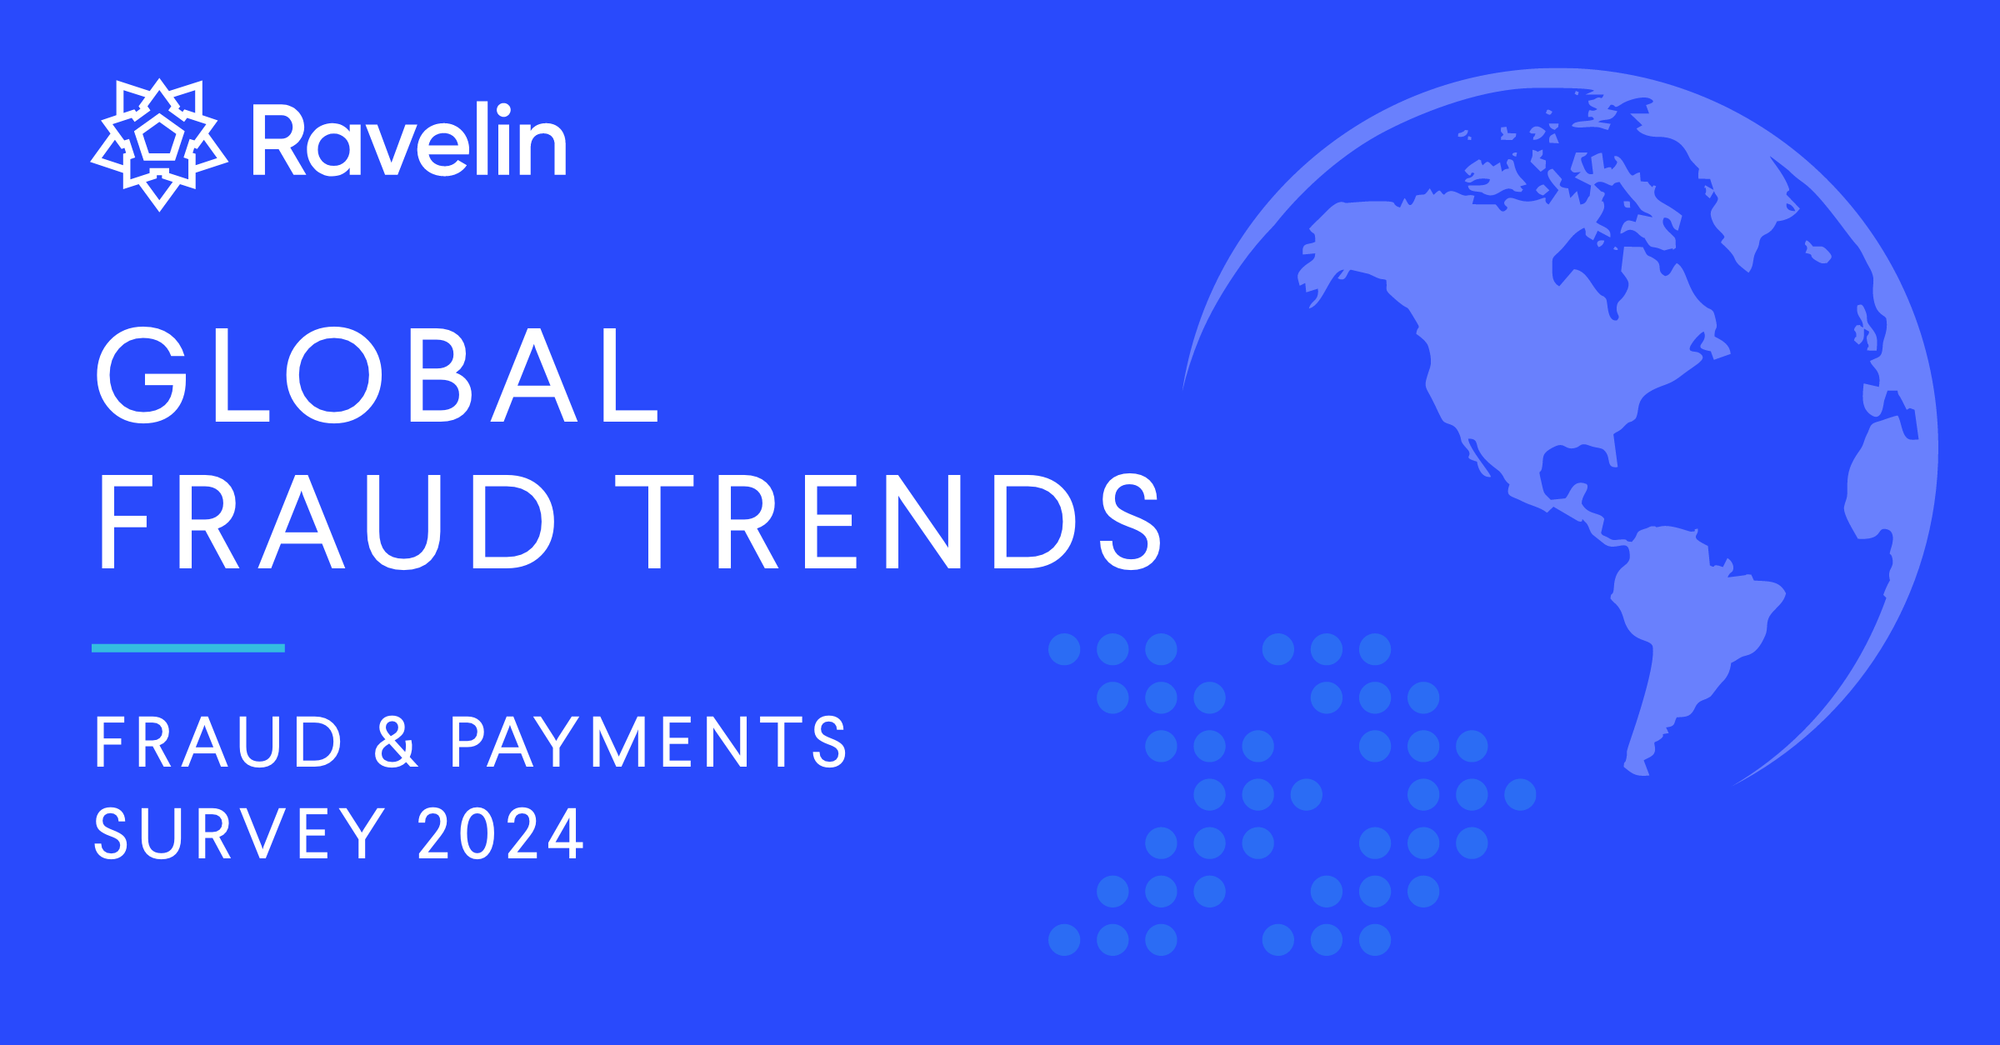 296_Global_Fraud_Trends_Survey_Landing_Page_1200_x_627_2